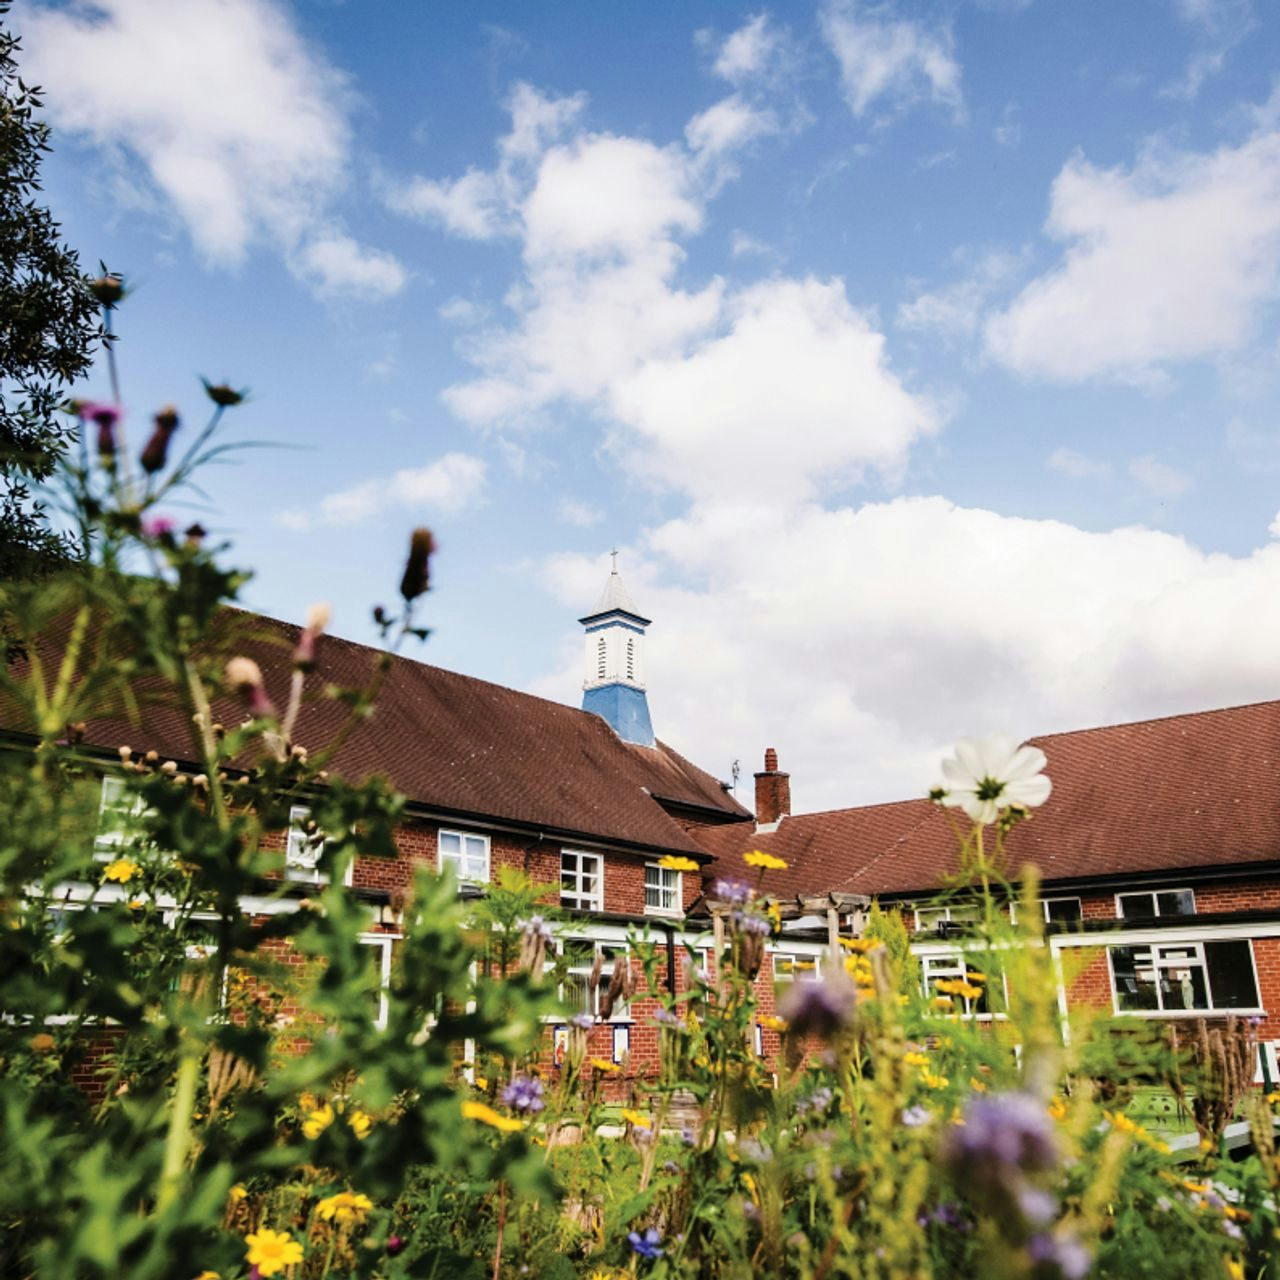 Traditional red-brick building with a blue tower, viewed over a colorful garden of wildflowers under a bright, cloudy sky.